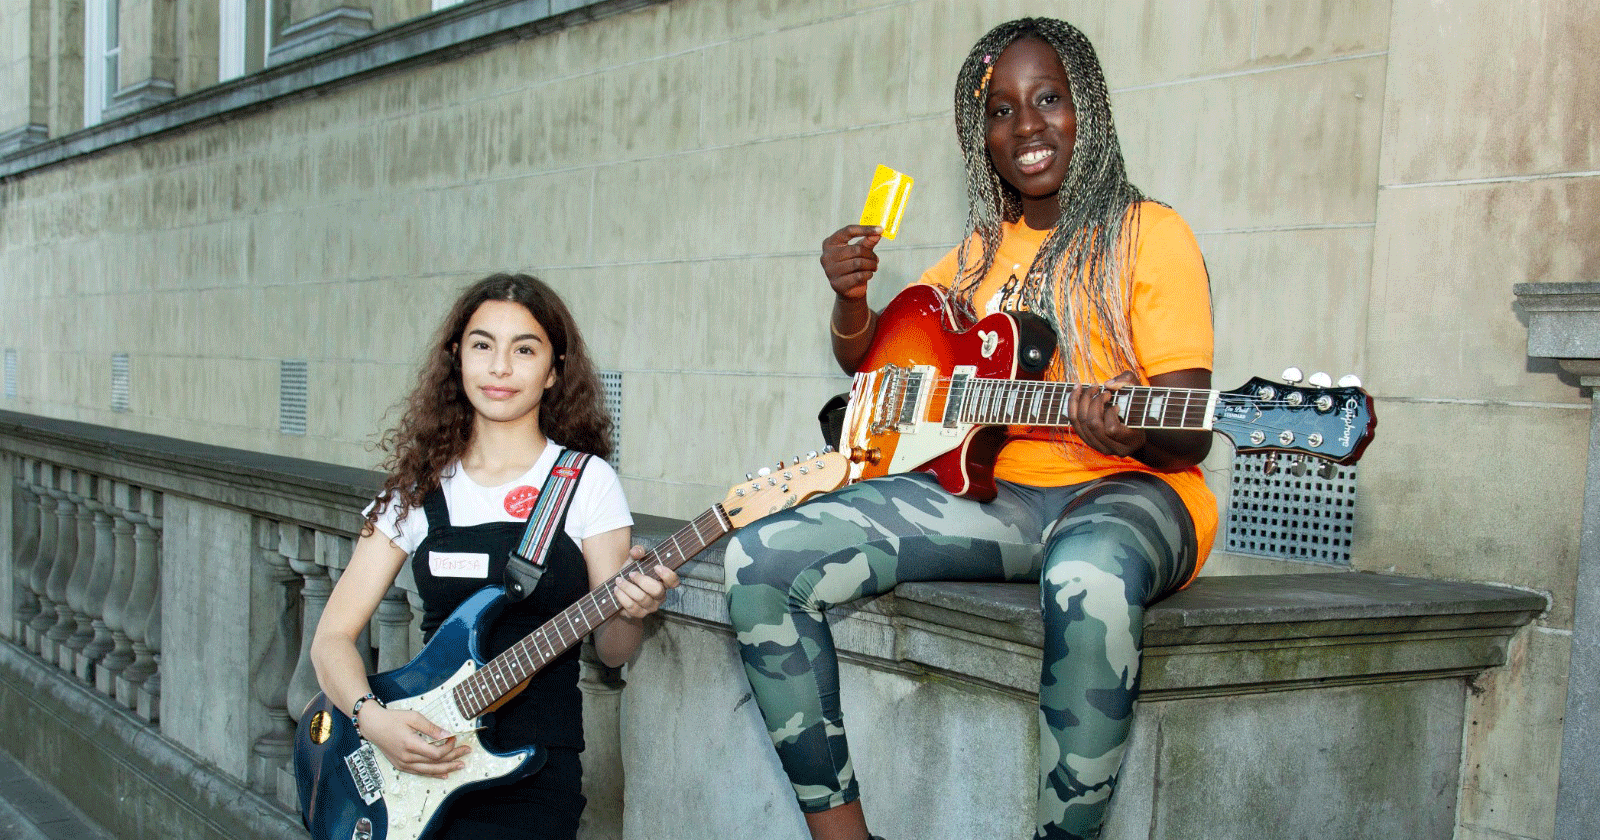 GRD gear library: image of girls with guitars